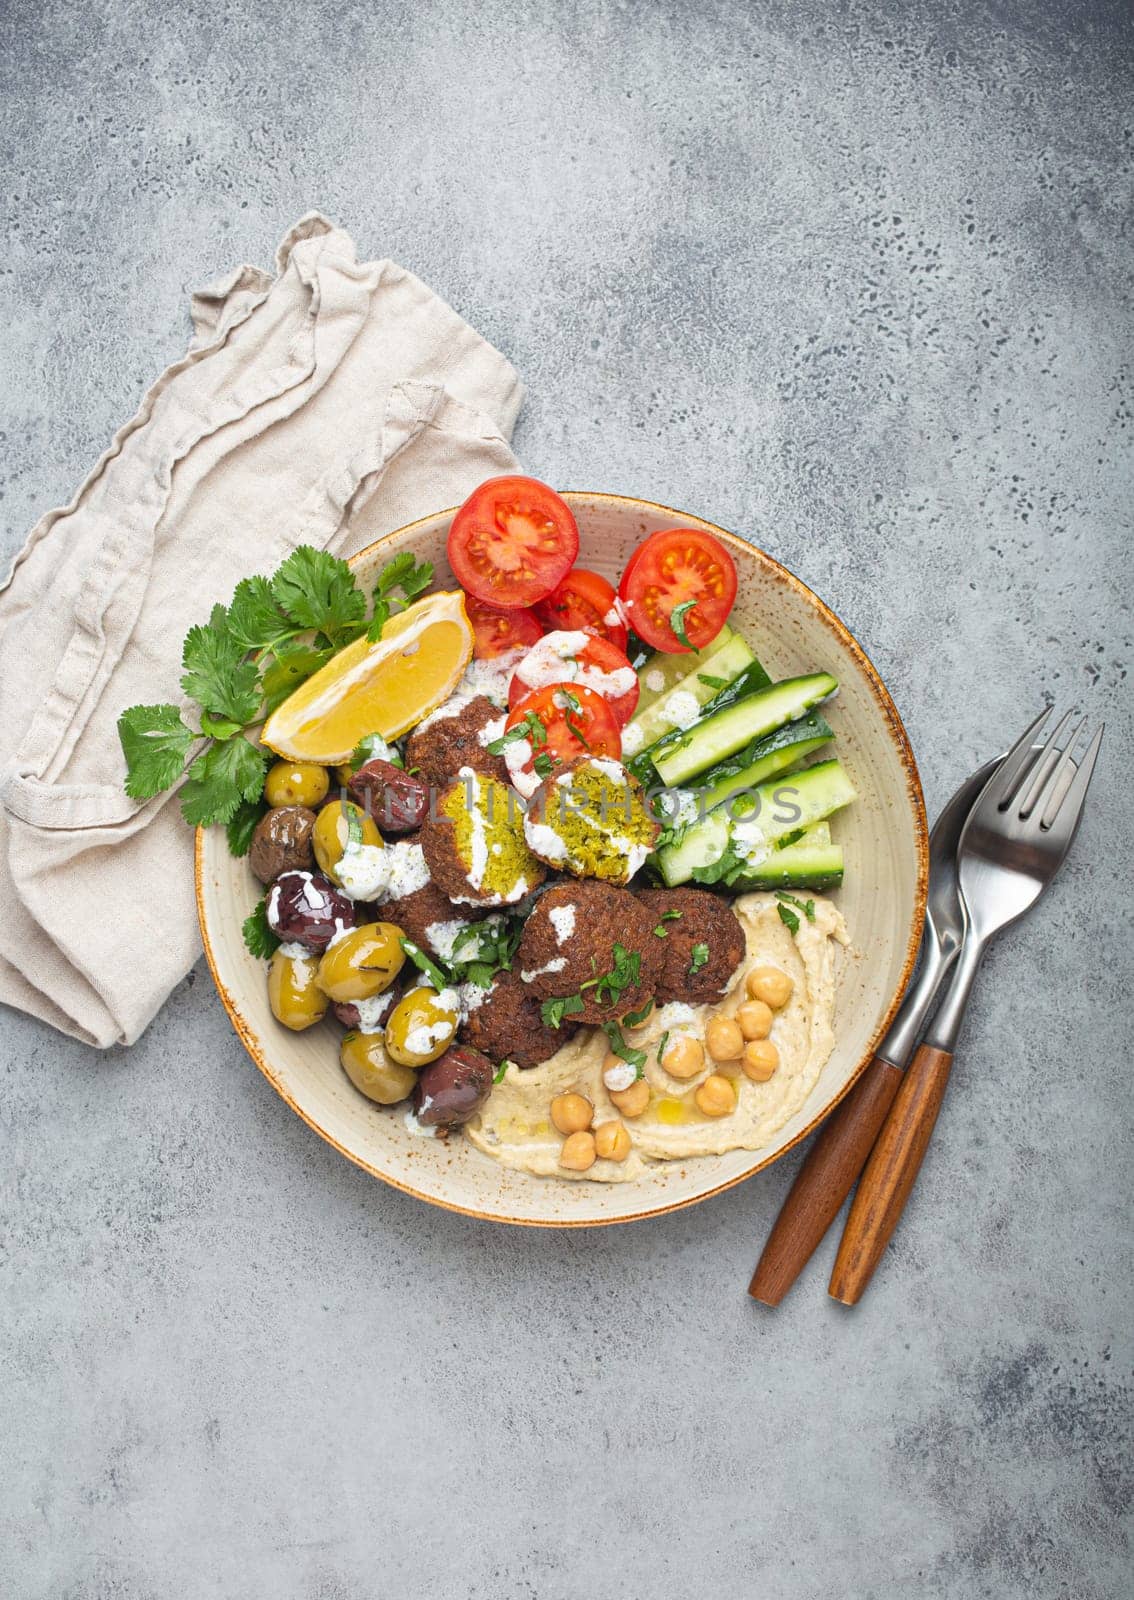 Falafel salad bowl with hummus, vegetables, olives and herbs. Vegan lunch plate top view, rustic stone background, healthy meal with falafel and veggies by its_al_dente